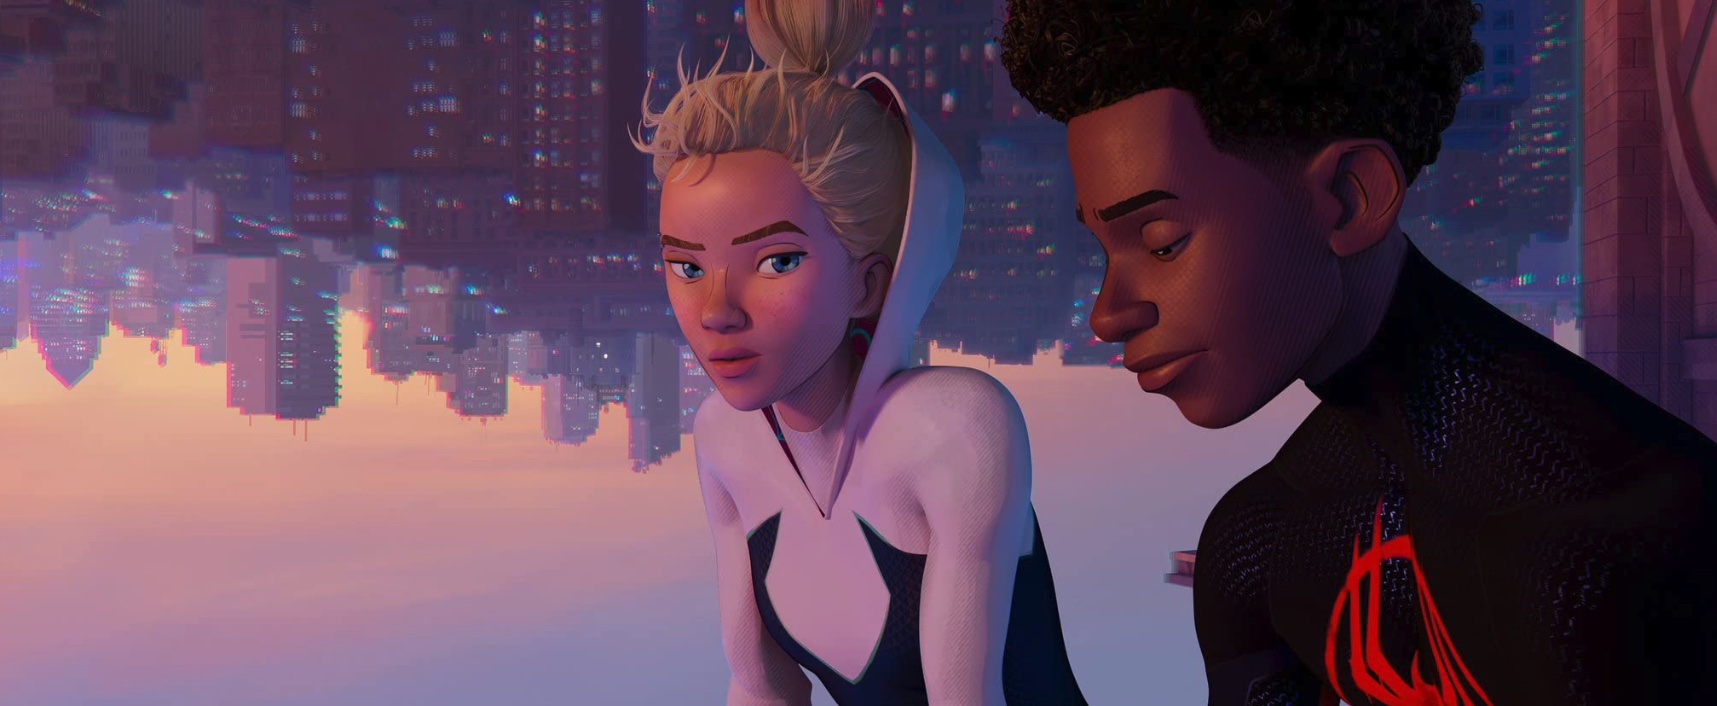 REVIEW: Spider-Man: Across the Spider-Verse is what happens when